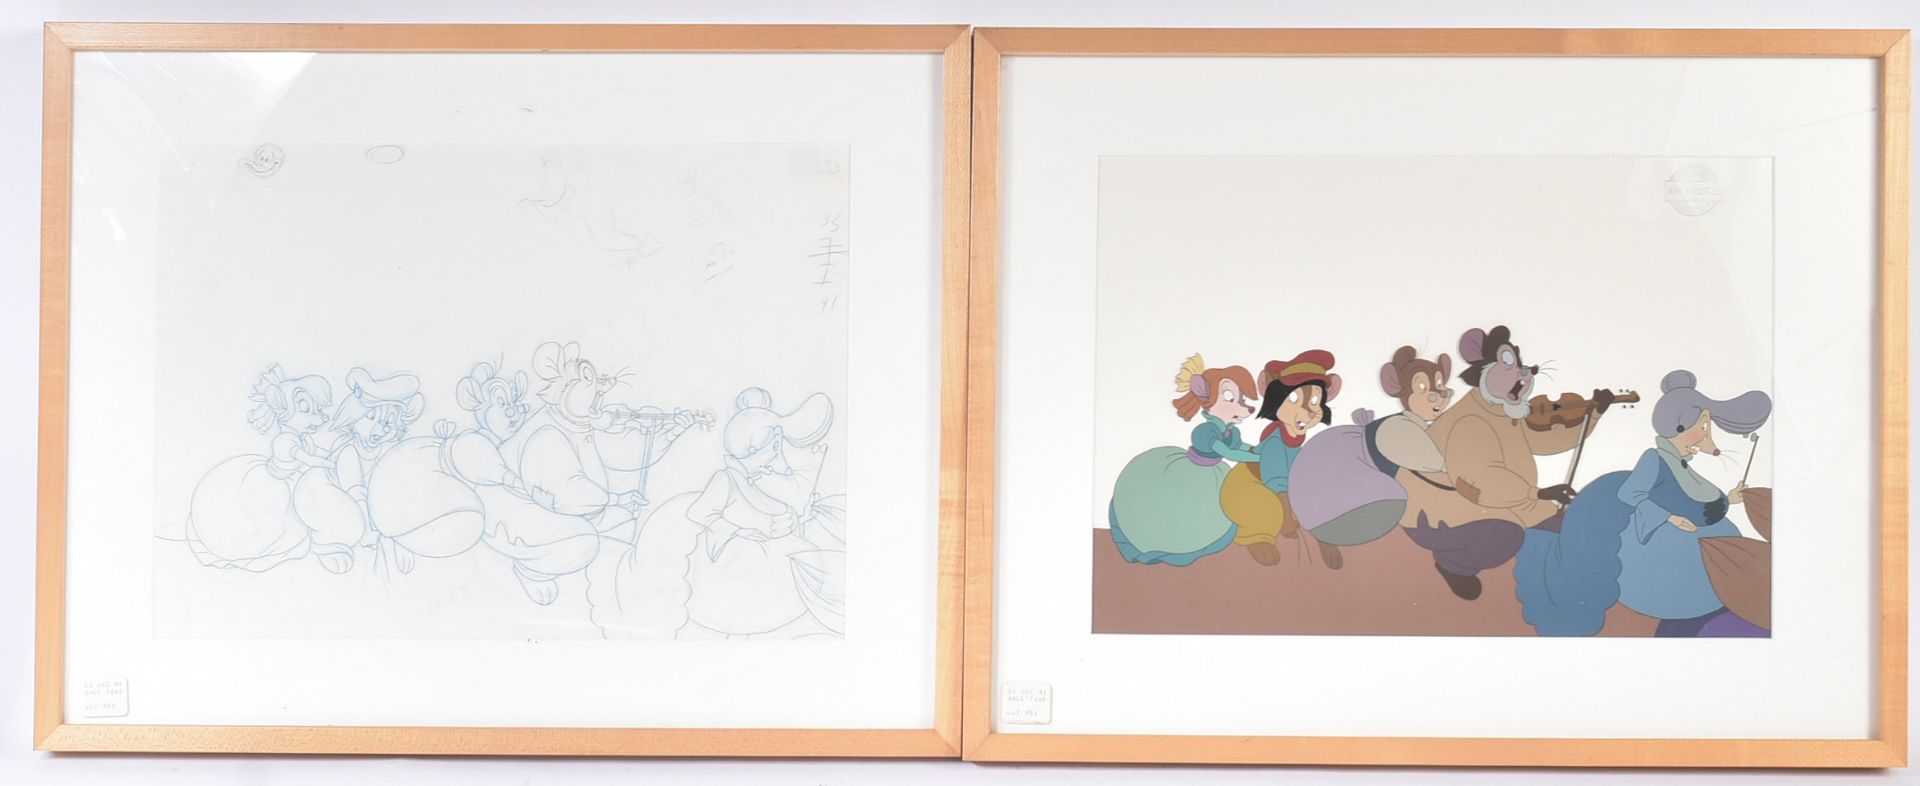 DON BLUTH - AN AMERICAN TALE (1986) - ORIGINAL PRODUCTION ARTWORK